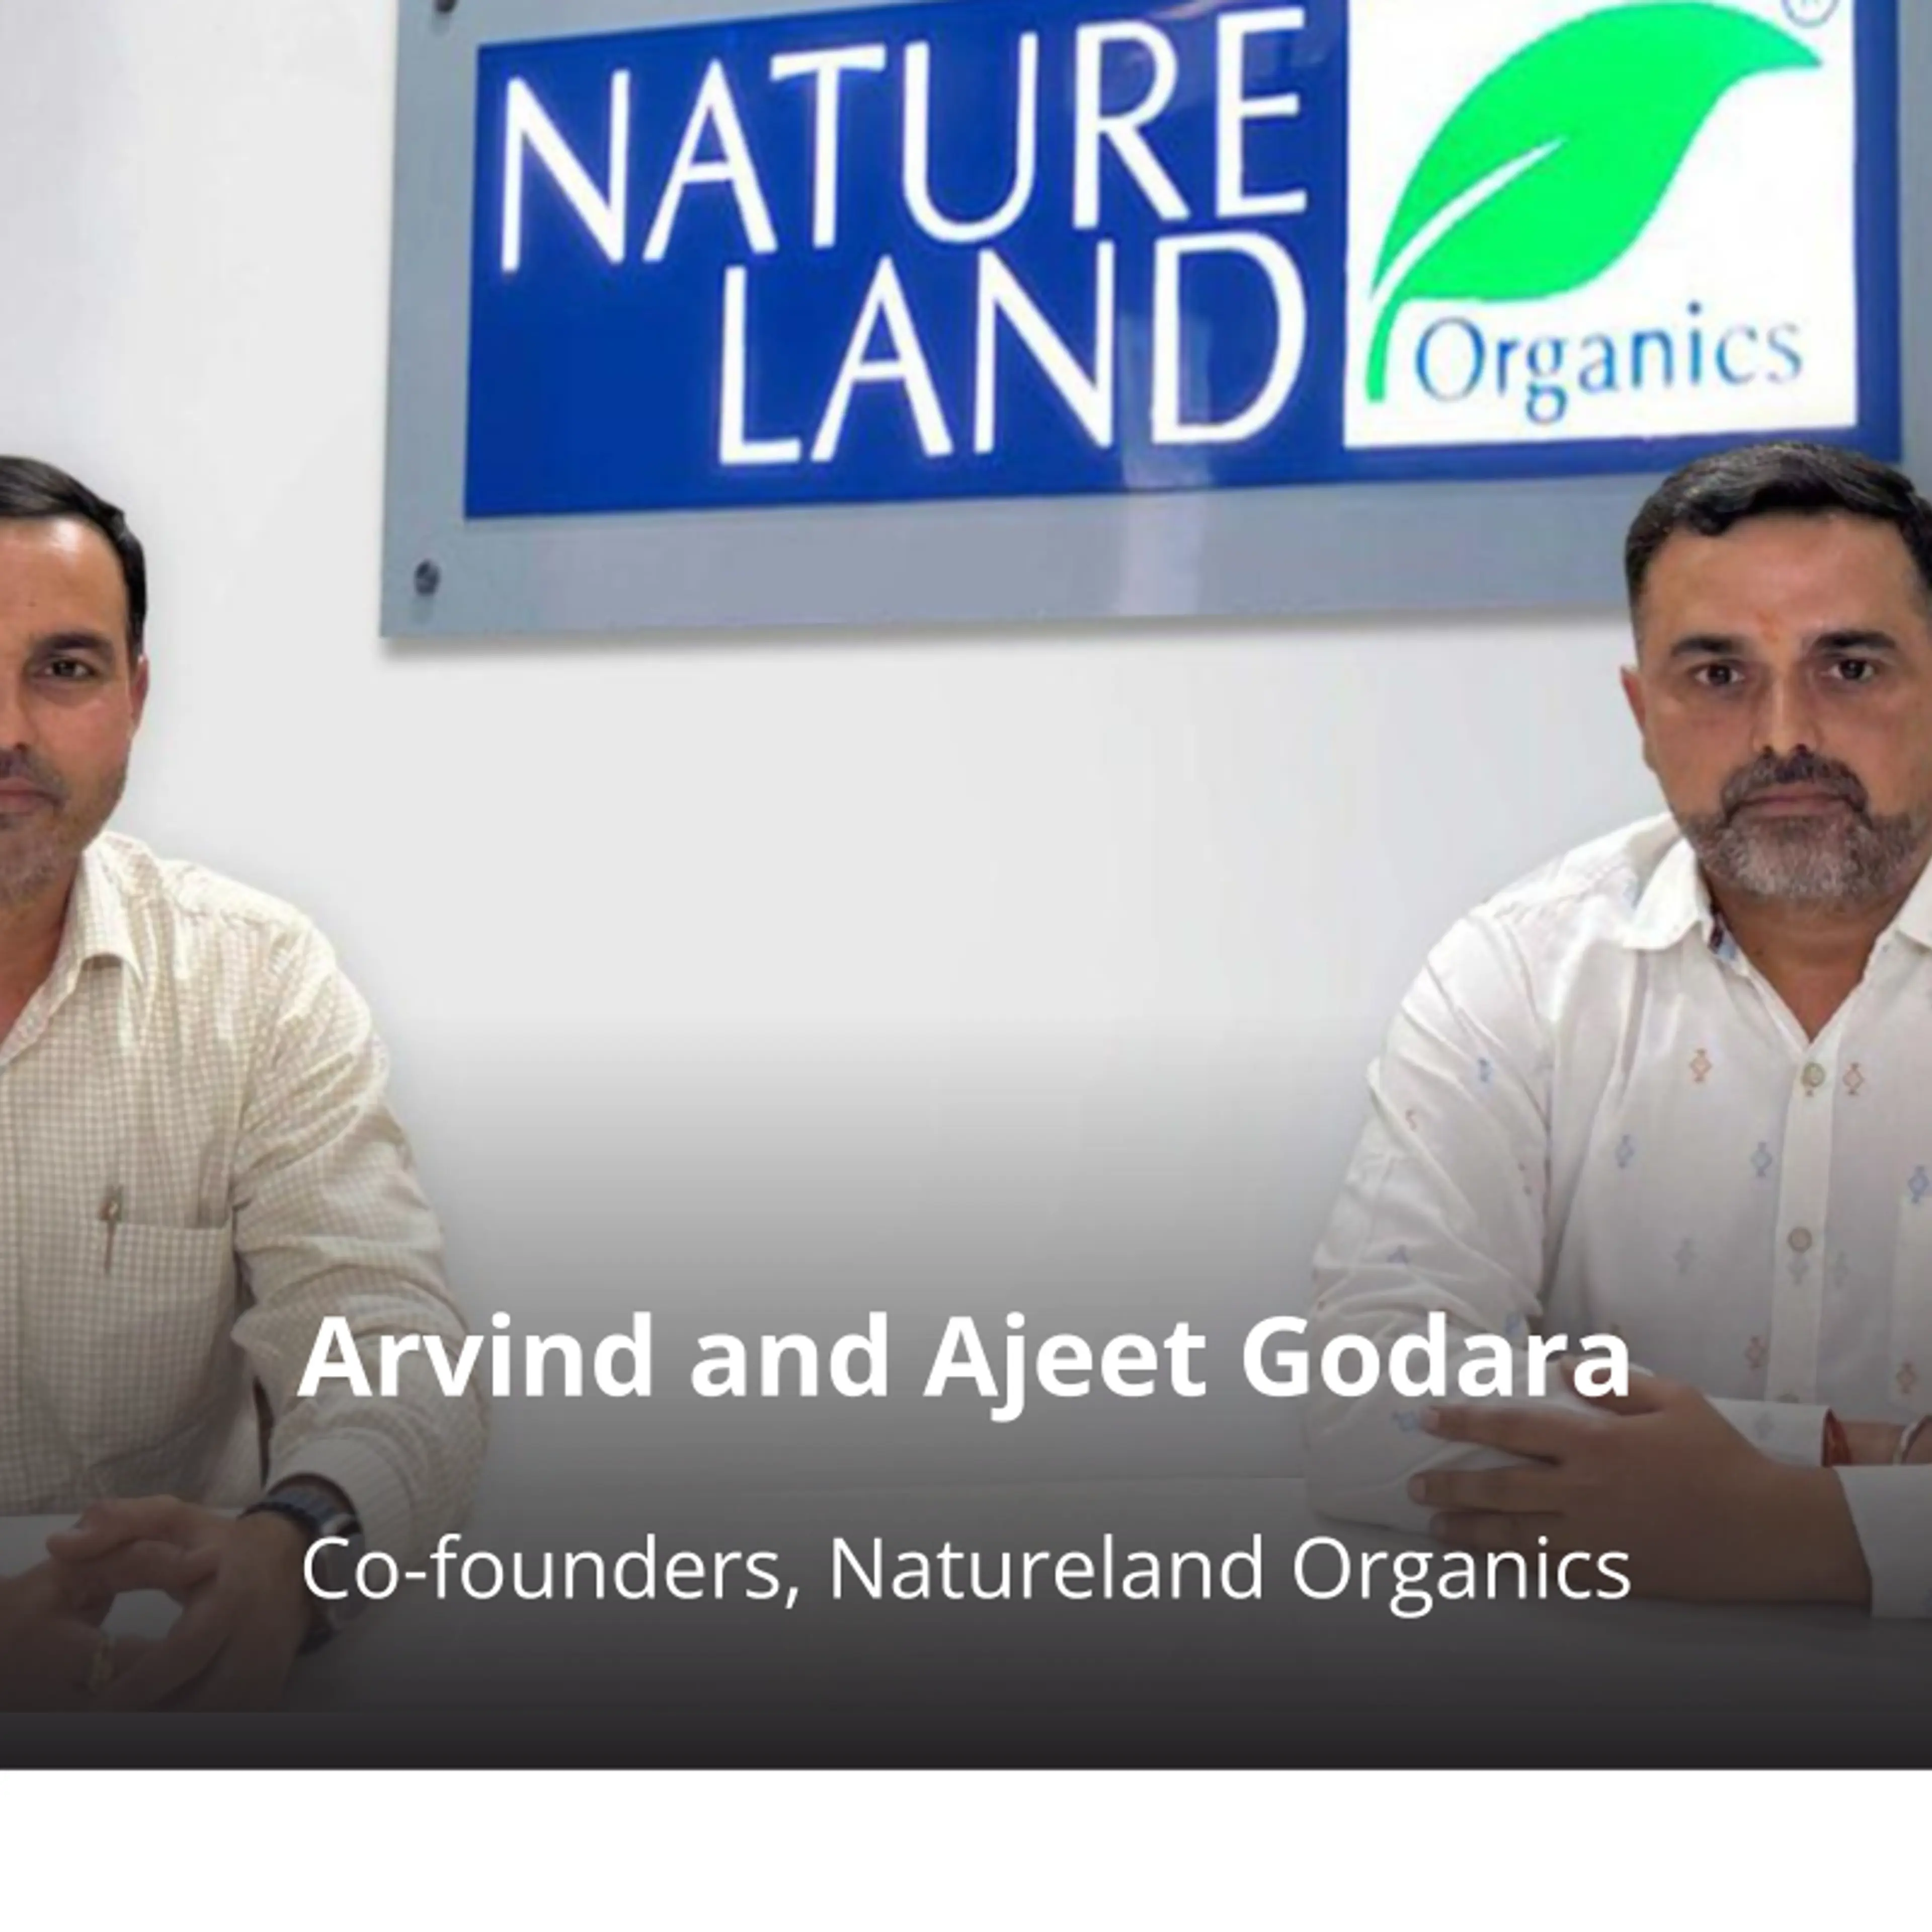 How organic farming brand Natureland Organics is staying relevant amid tough competition